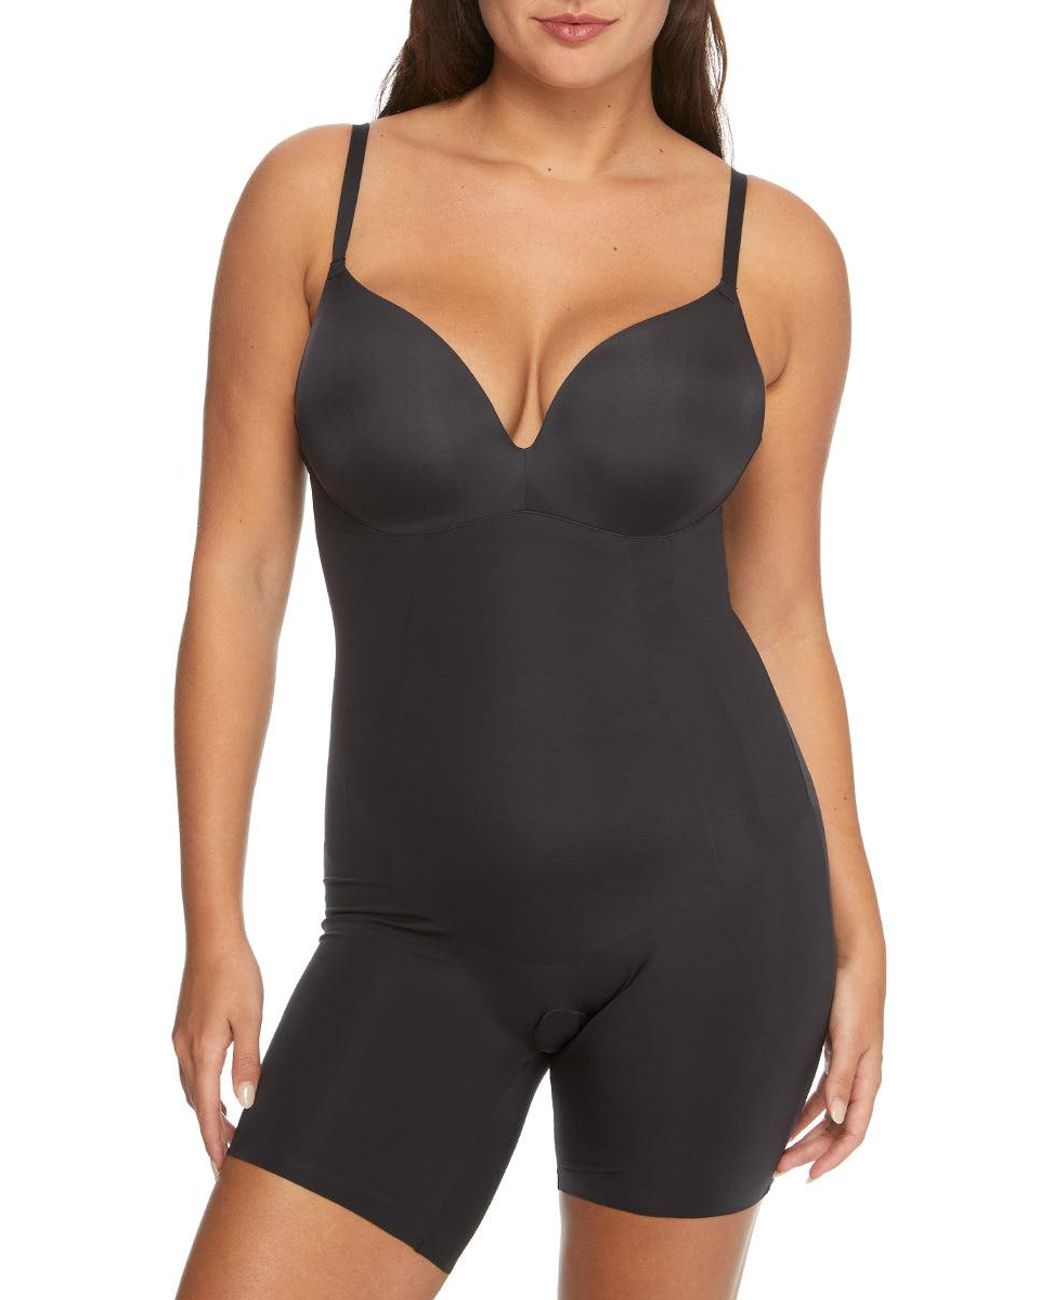 Maidenform All-in-one Firm Control Mid-thigh Shaper in Black